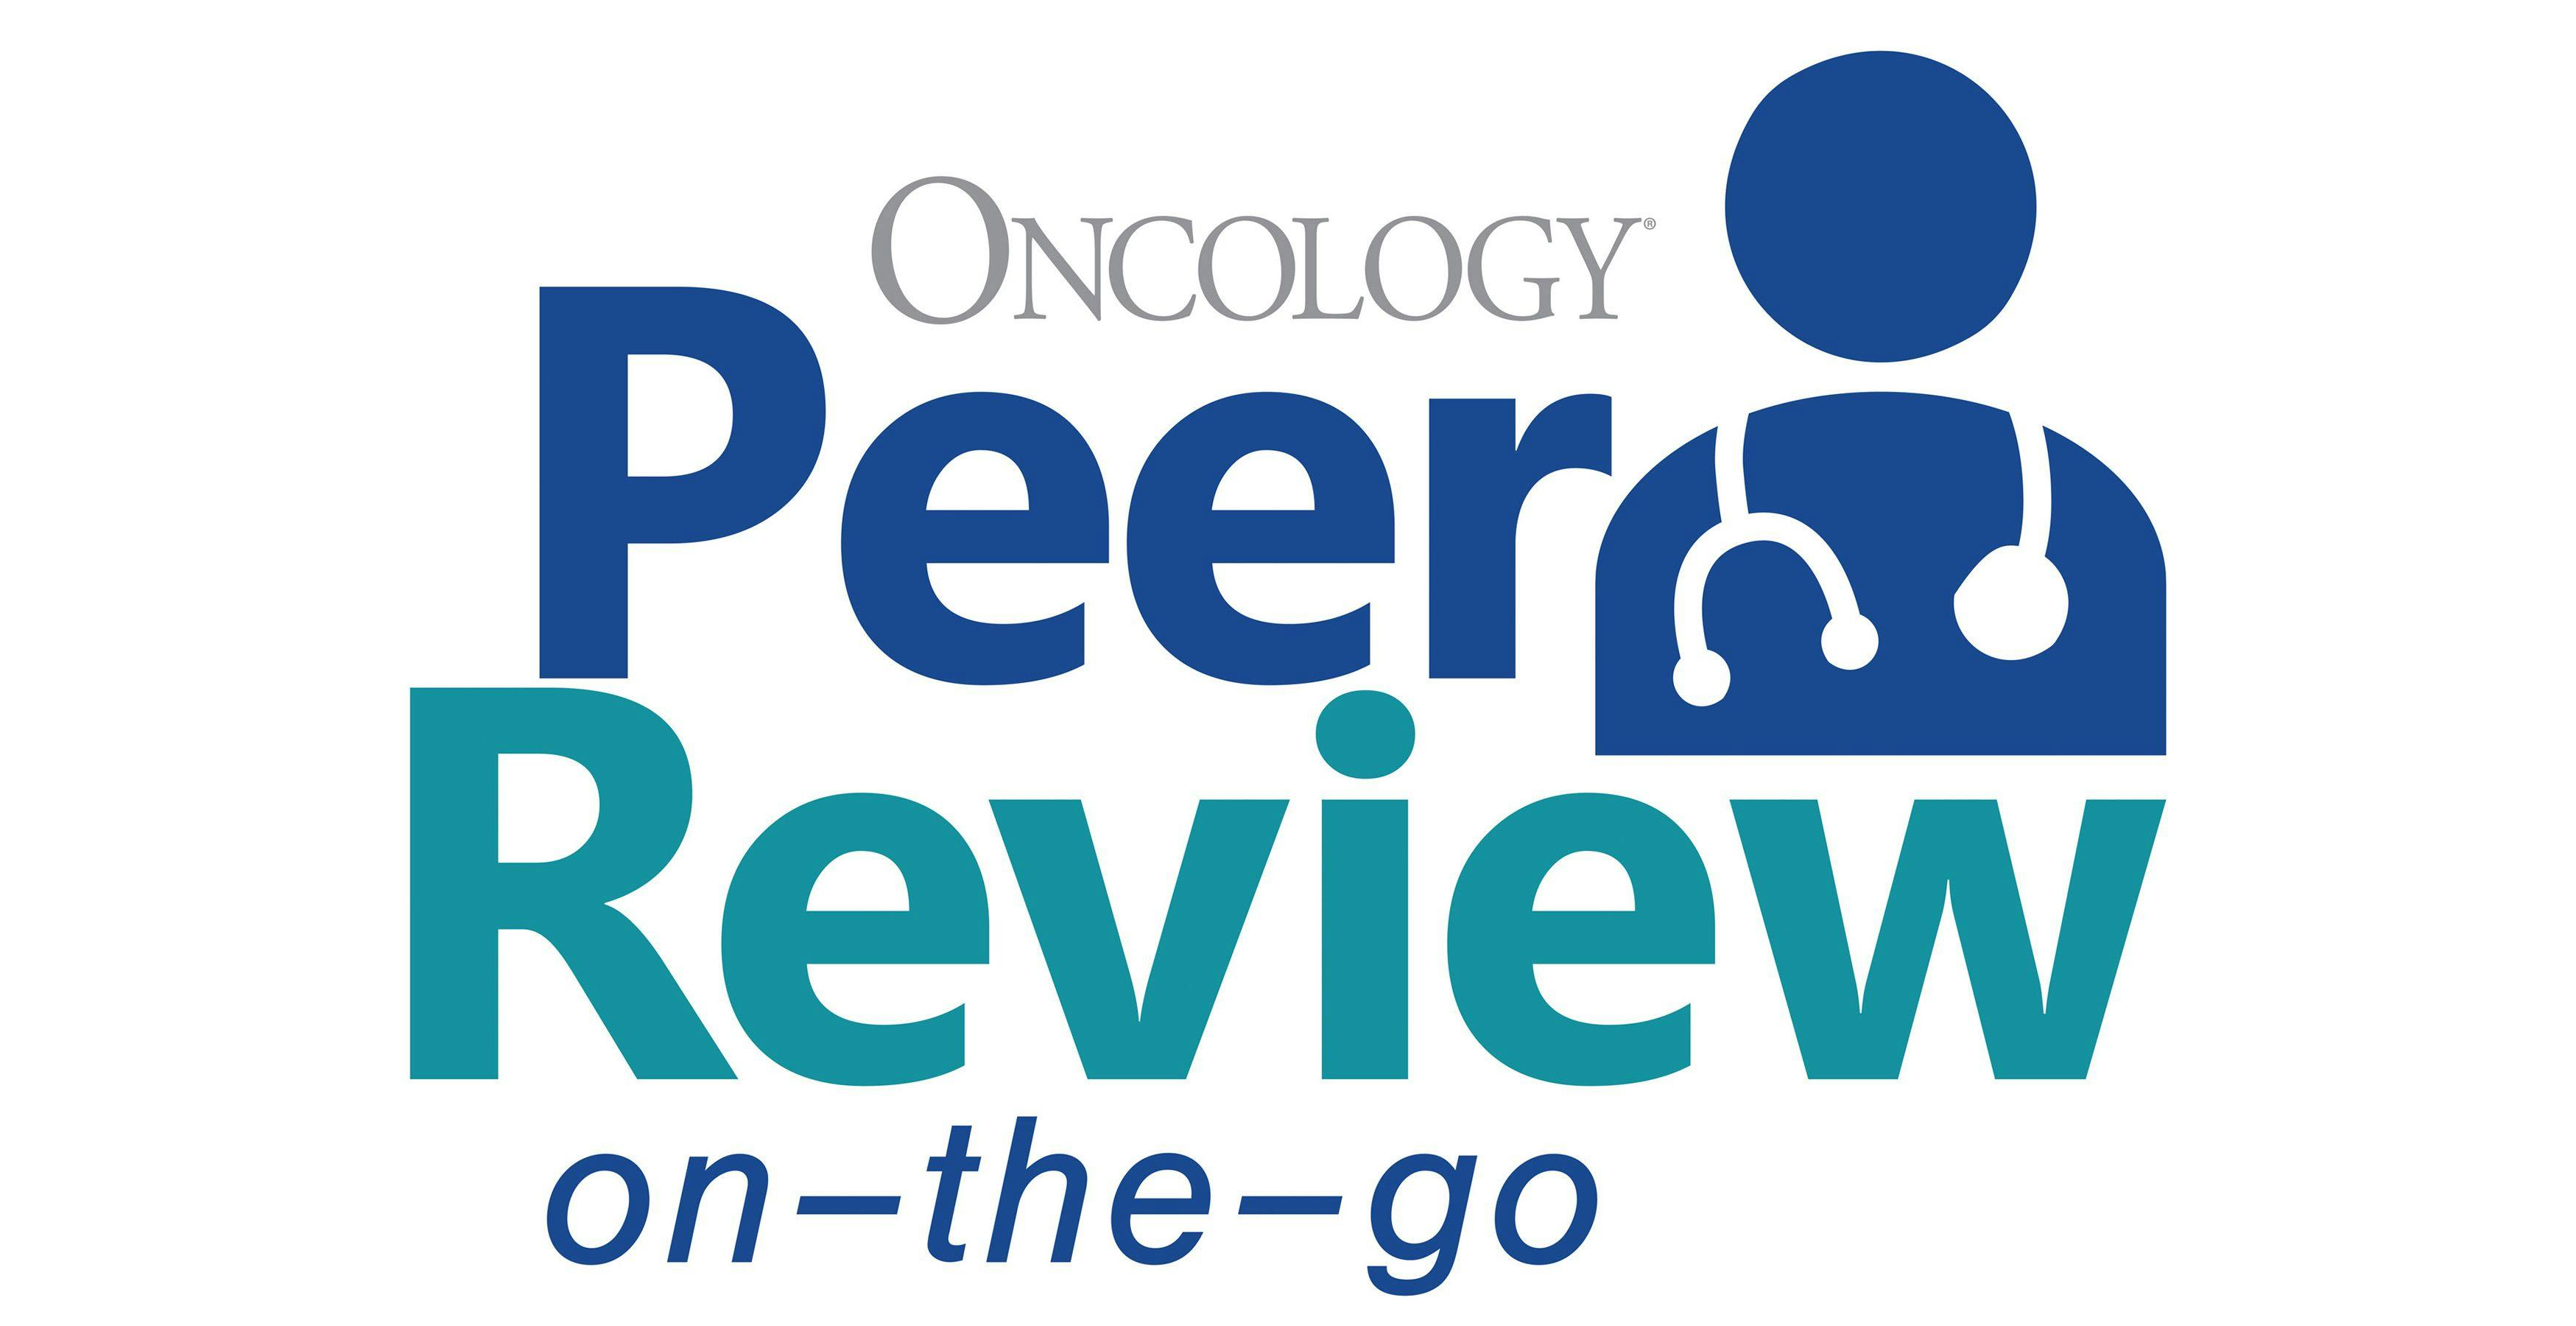 Ofer Sharon, MD, spoke about the PROphet diagnostic platform for non–small cell lung cancer and the latest interim results from the prospective PROPHETIC trial in the most recent episode of CancerNetwork’s® "Oncology Peer Review On-The-Go" podcast.